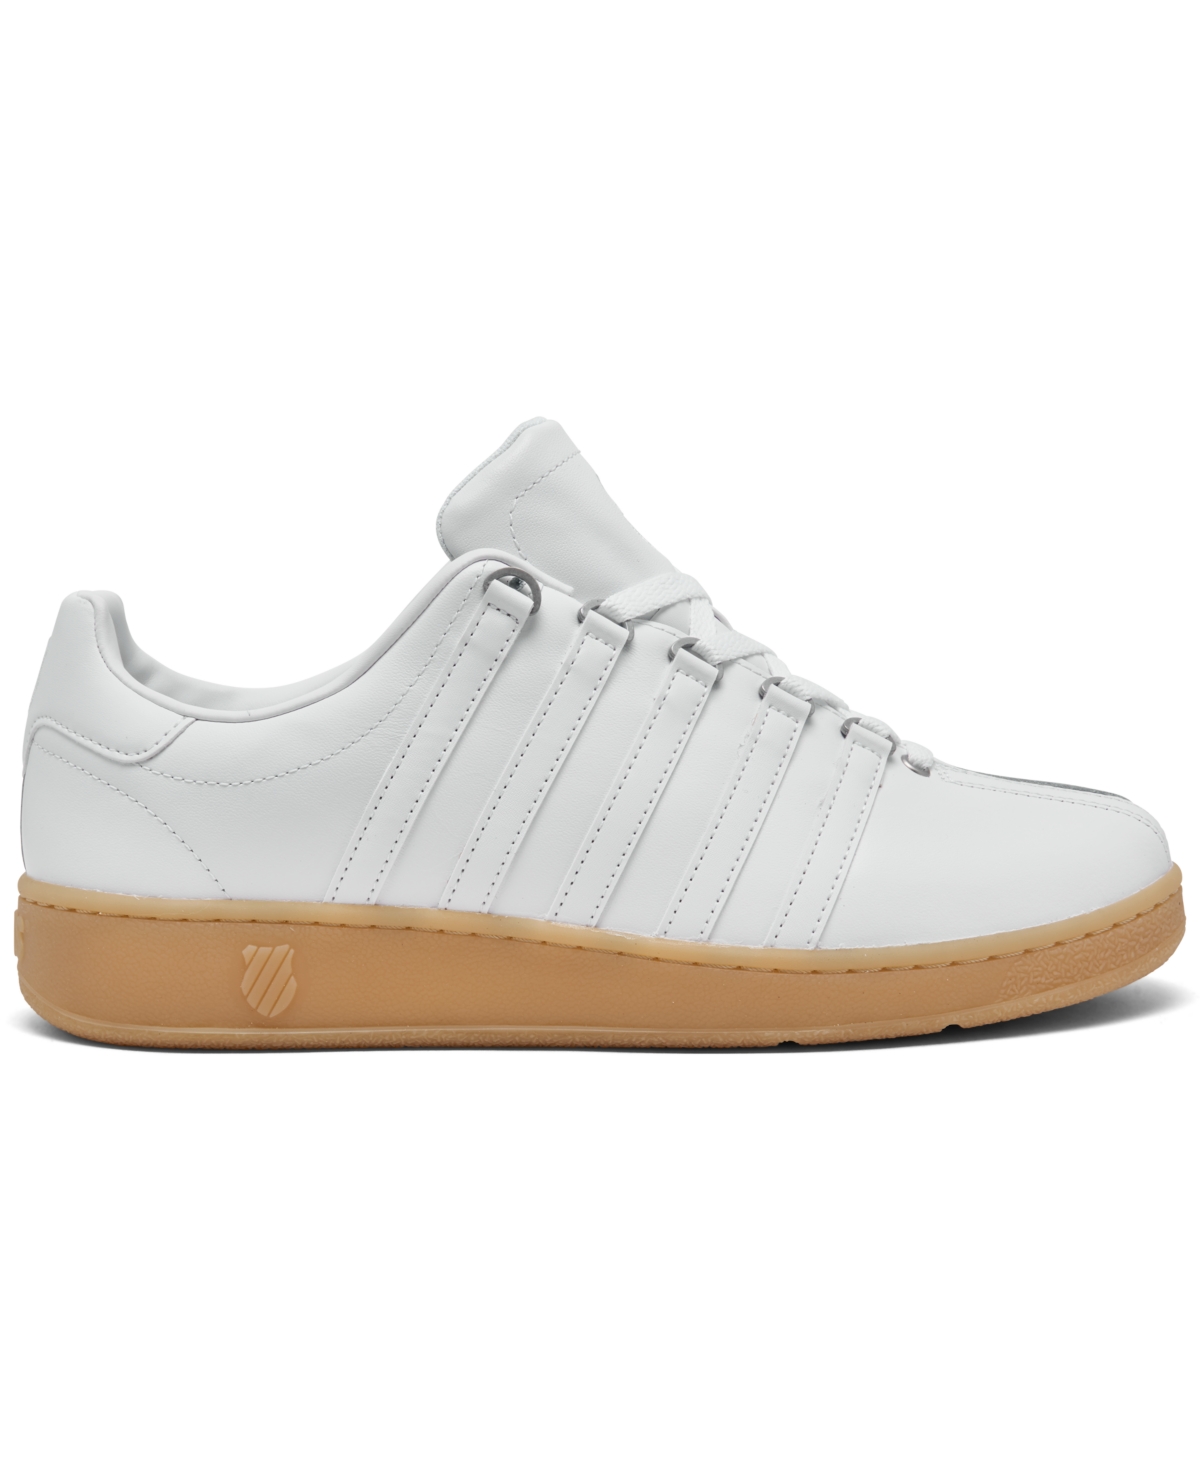 K-Swiss Men's Classic Vn Casual Sneakers from Finish Line